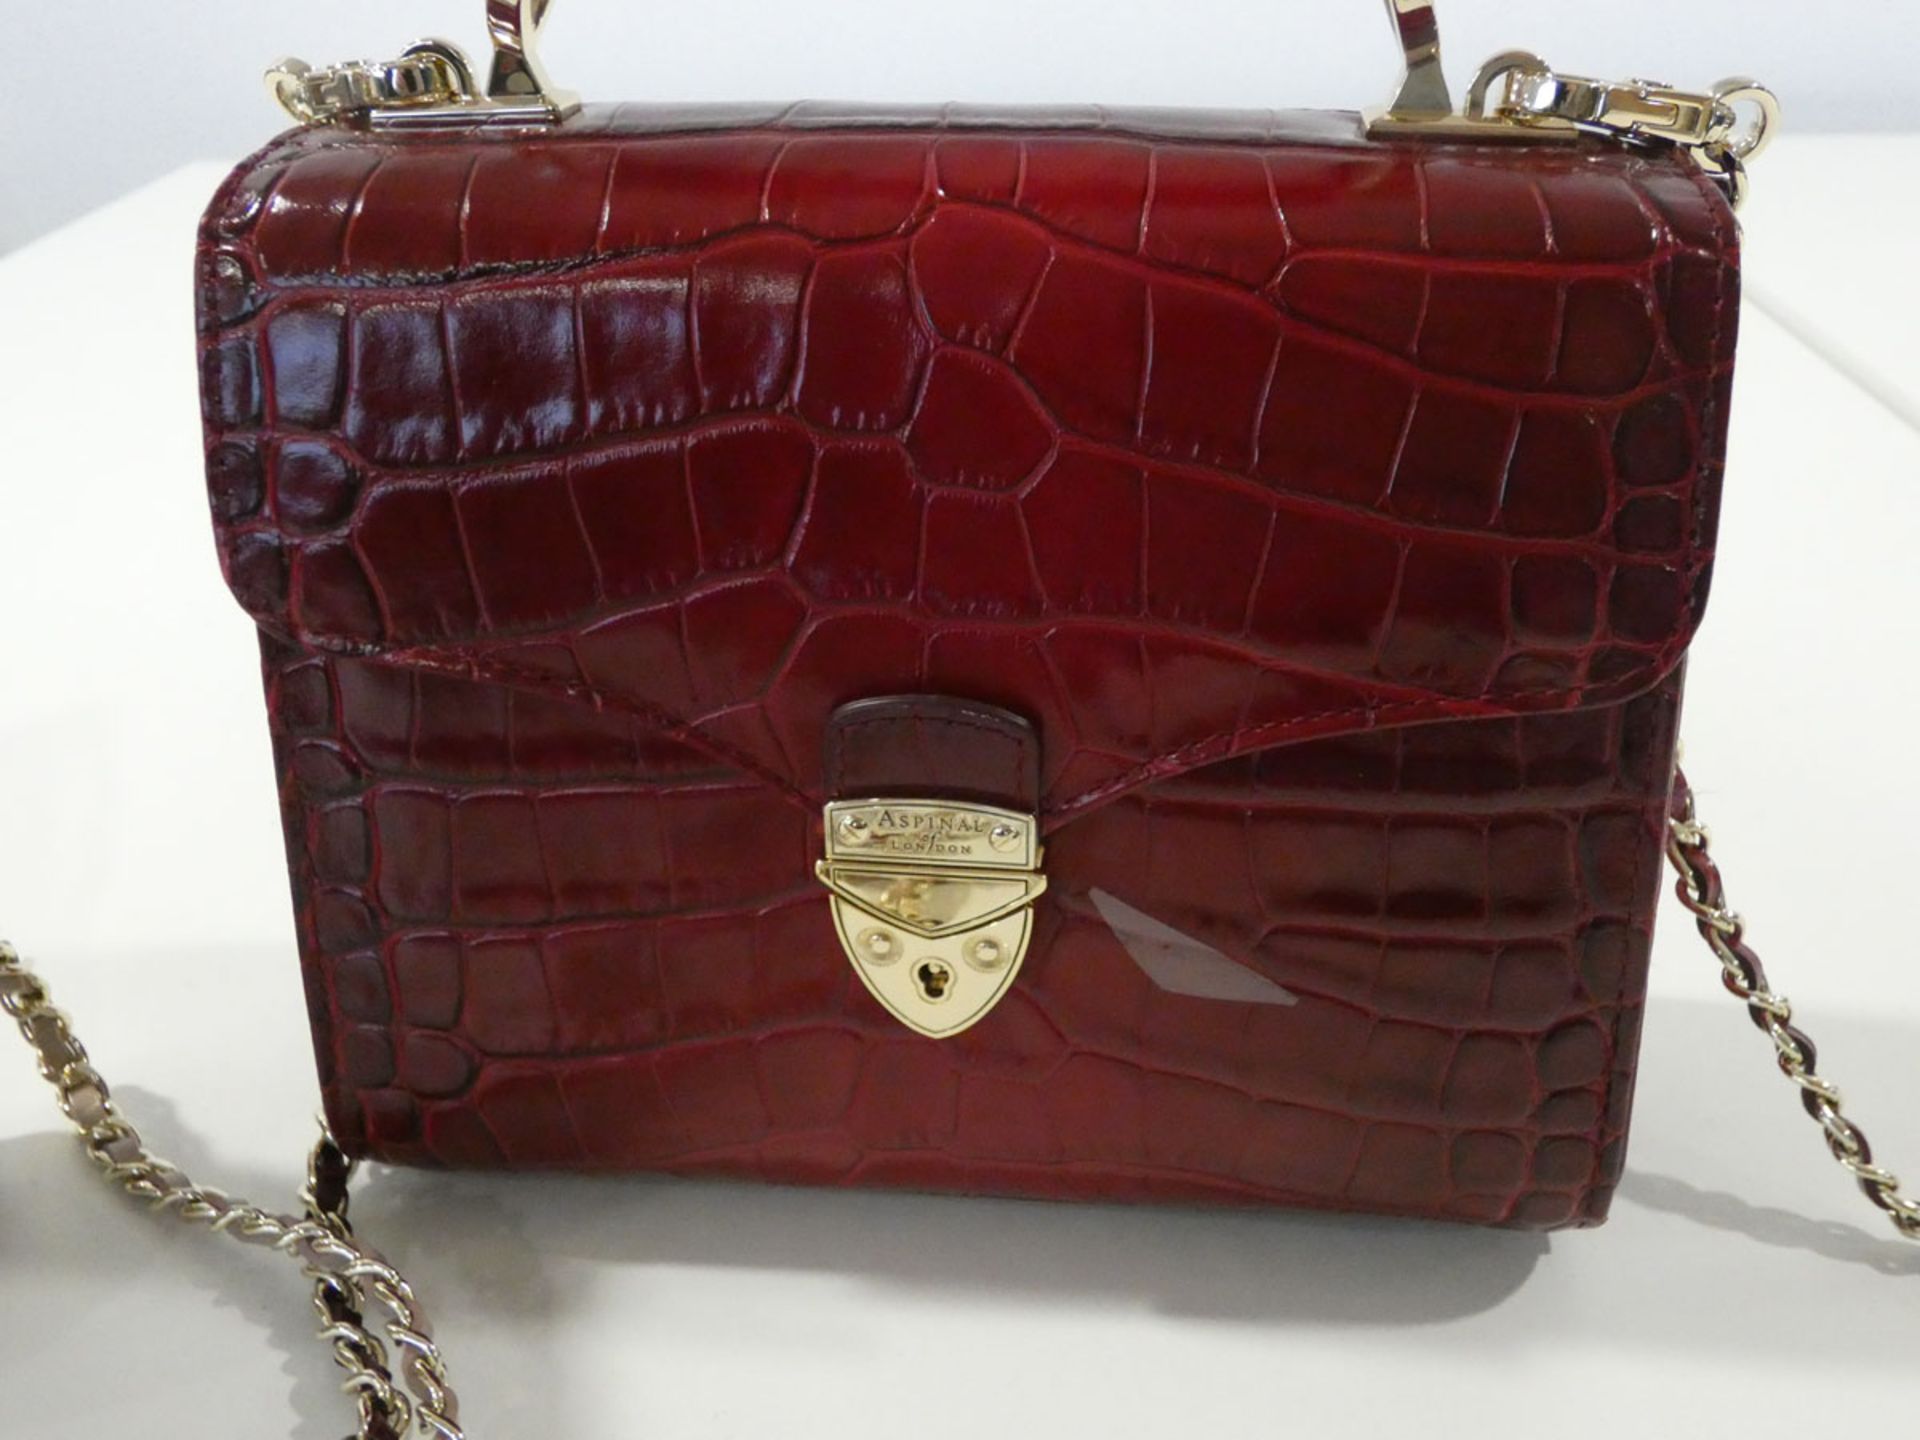 Aspinal of London Midi Mock Croc Bag in beige and red - Image 2 of 8